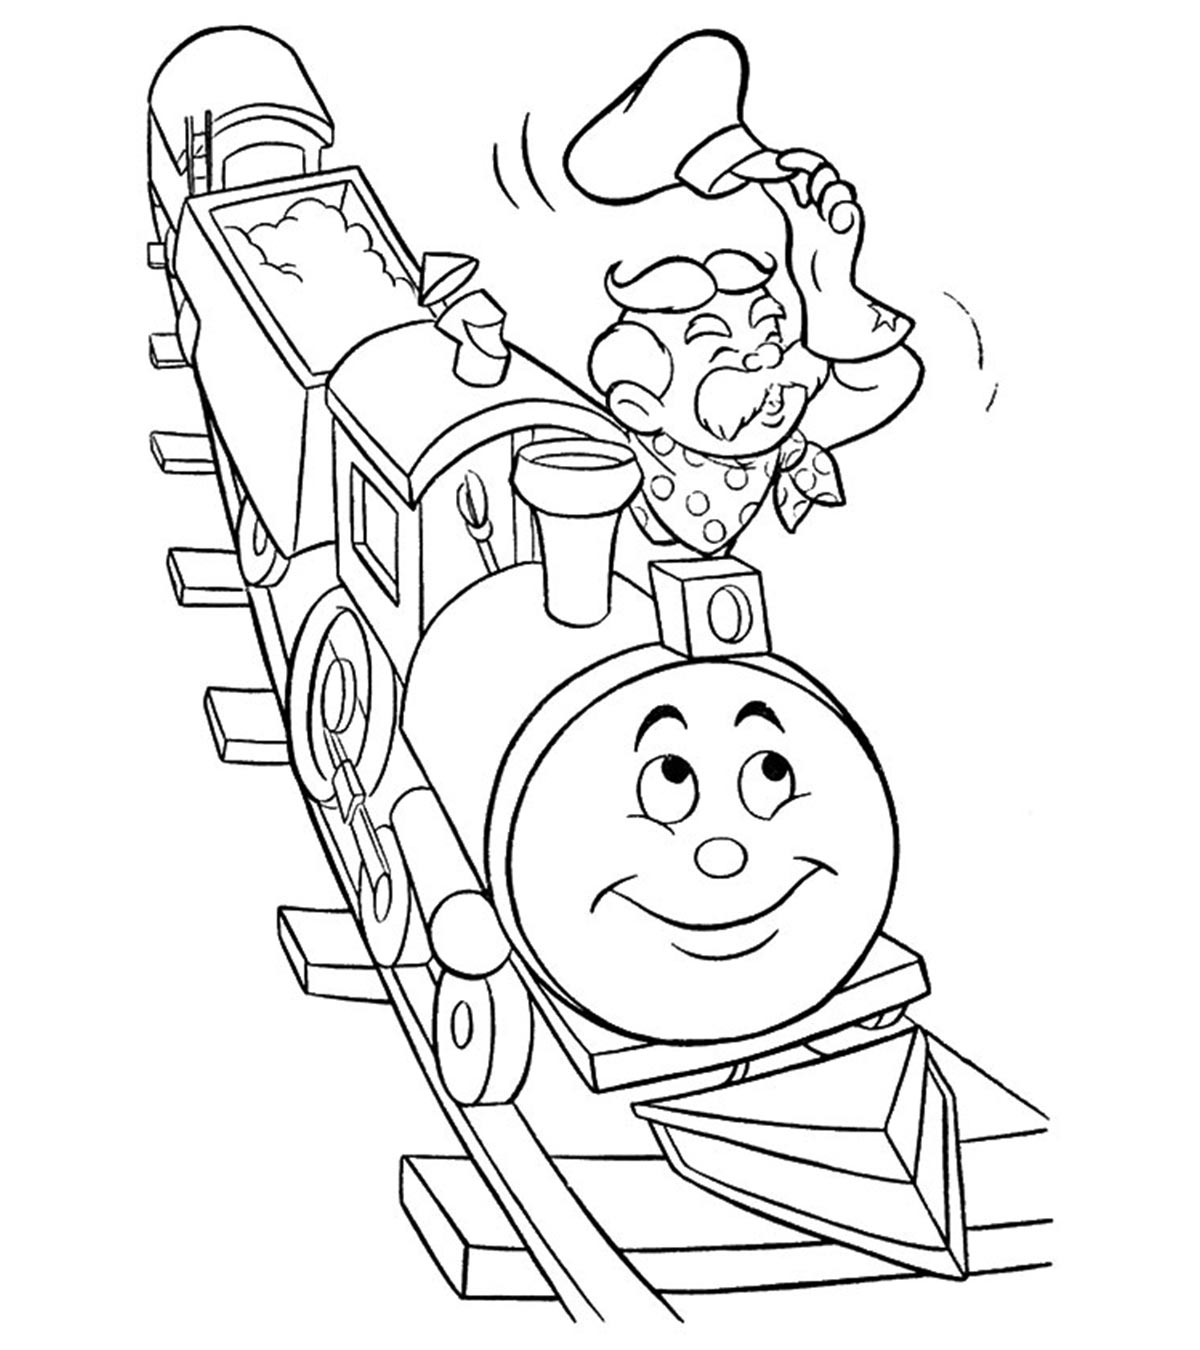 26 Best Train Coloring Pages Your Toddler Will Love To Color_image